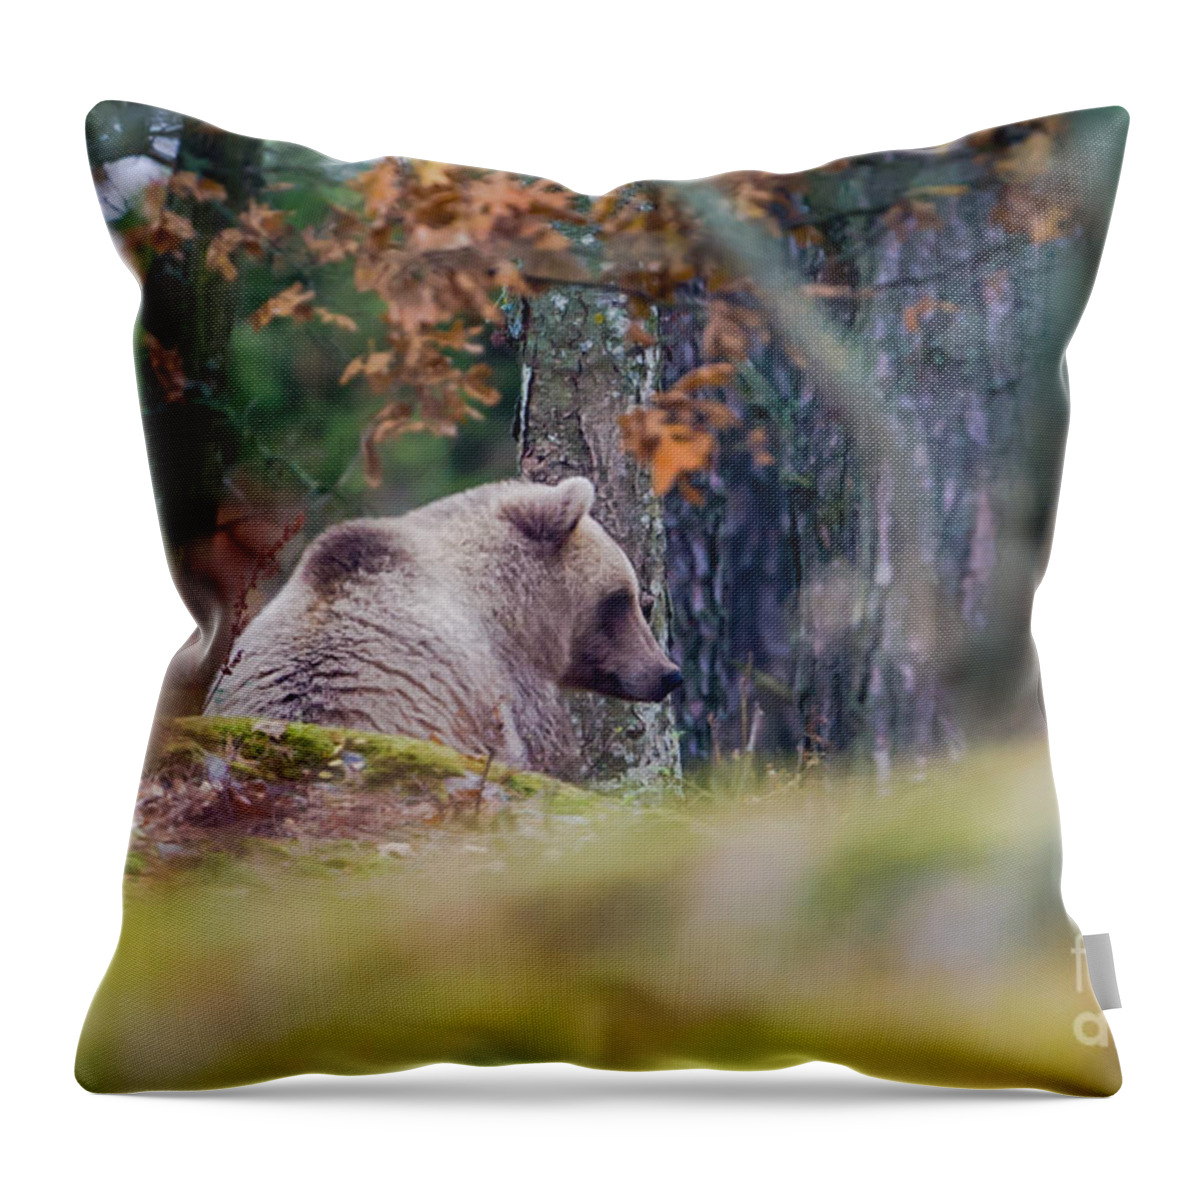 Waiting Bear Throw Pillow featuring the photograph Waiting Bear by Torbjorn Swenelius